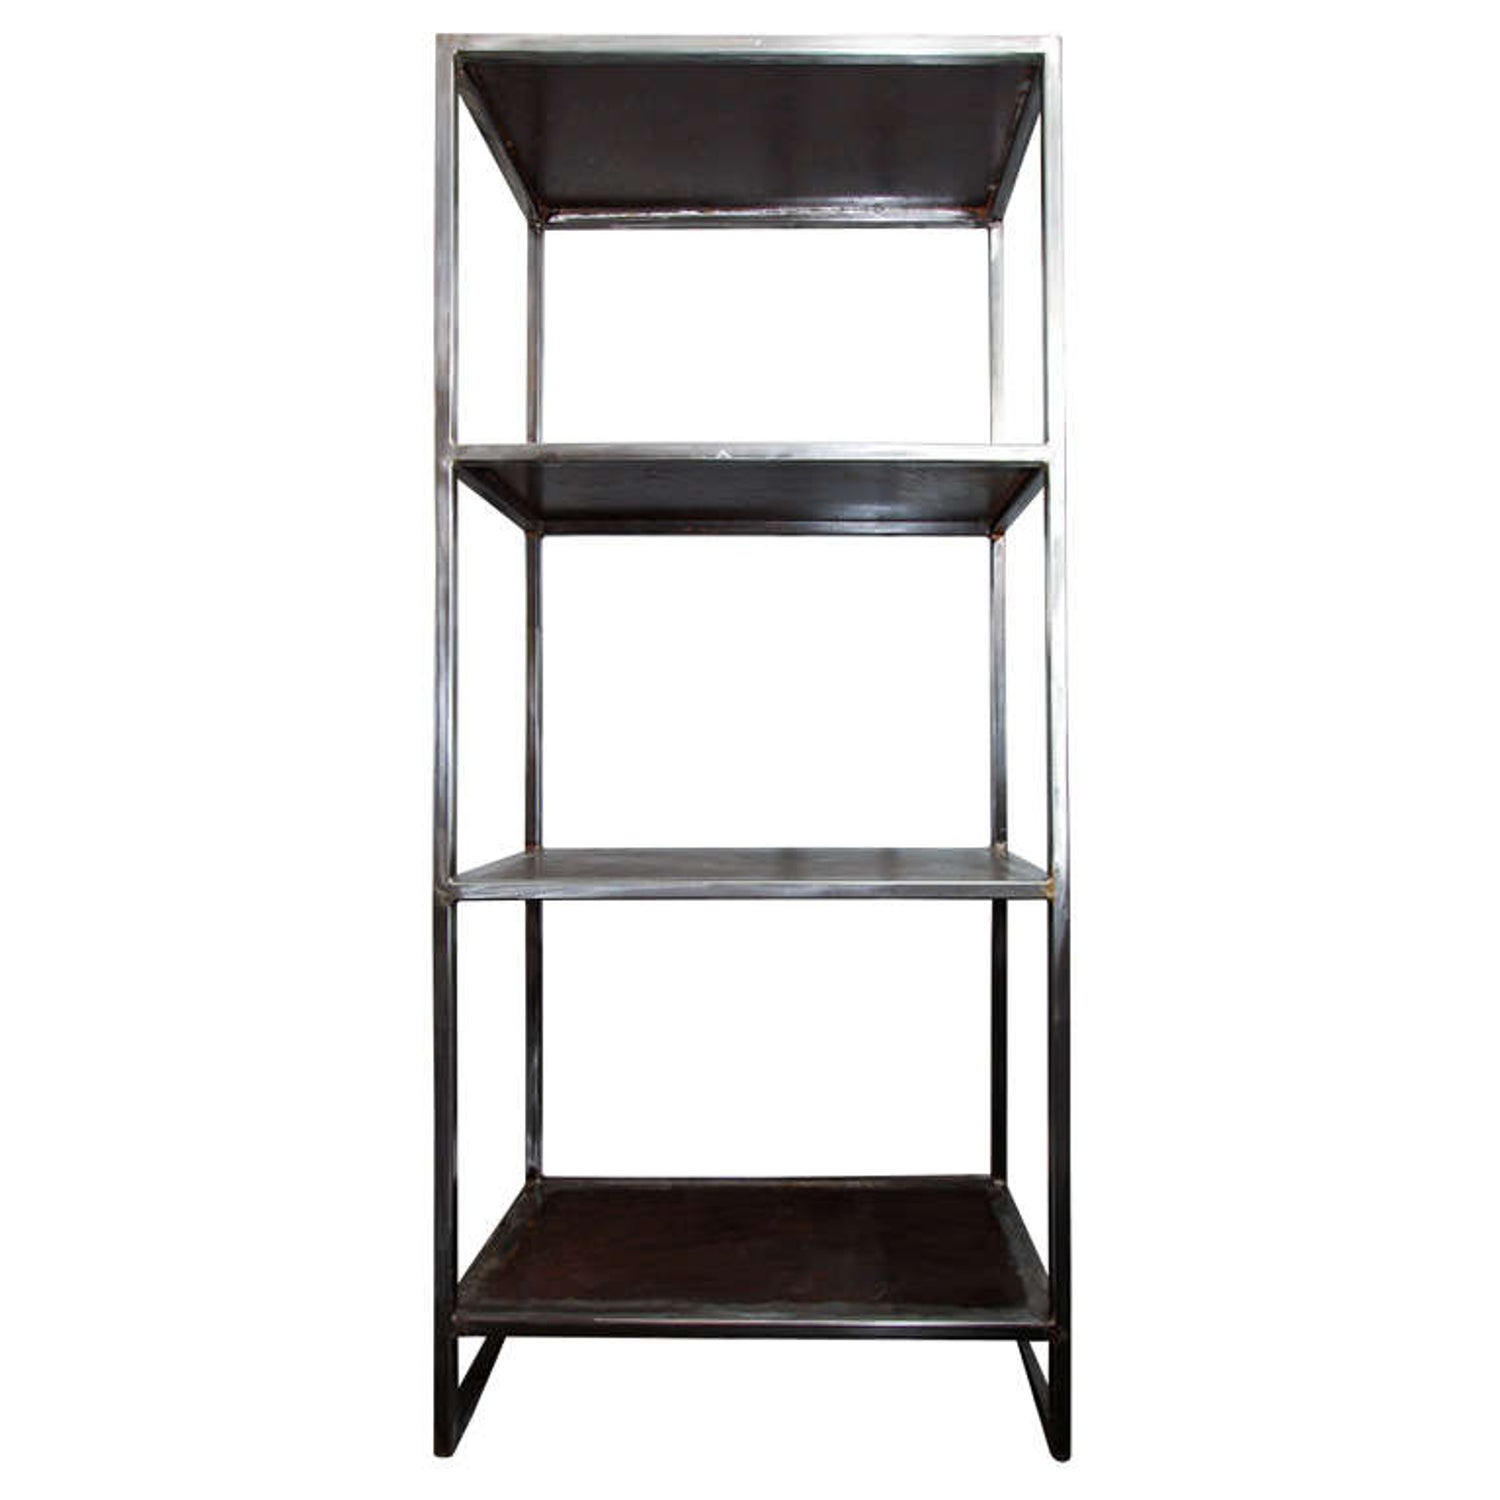 Custom-Made Recycled Steel Shelf For Sale at 1stDibs